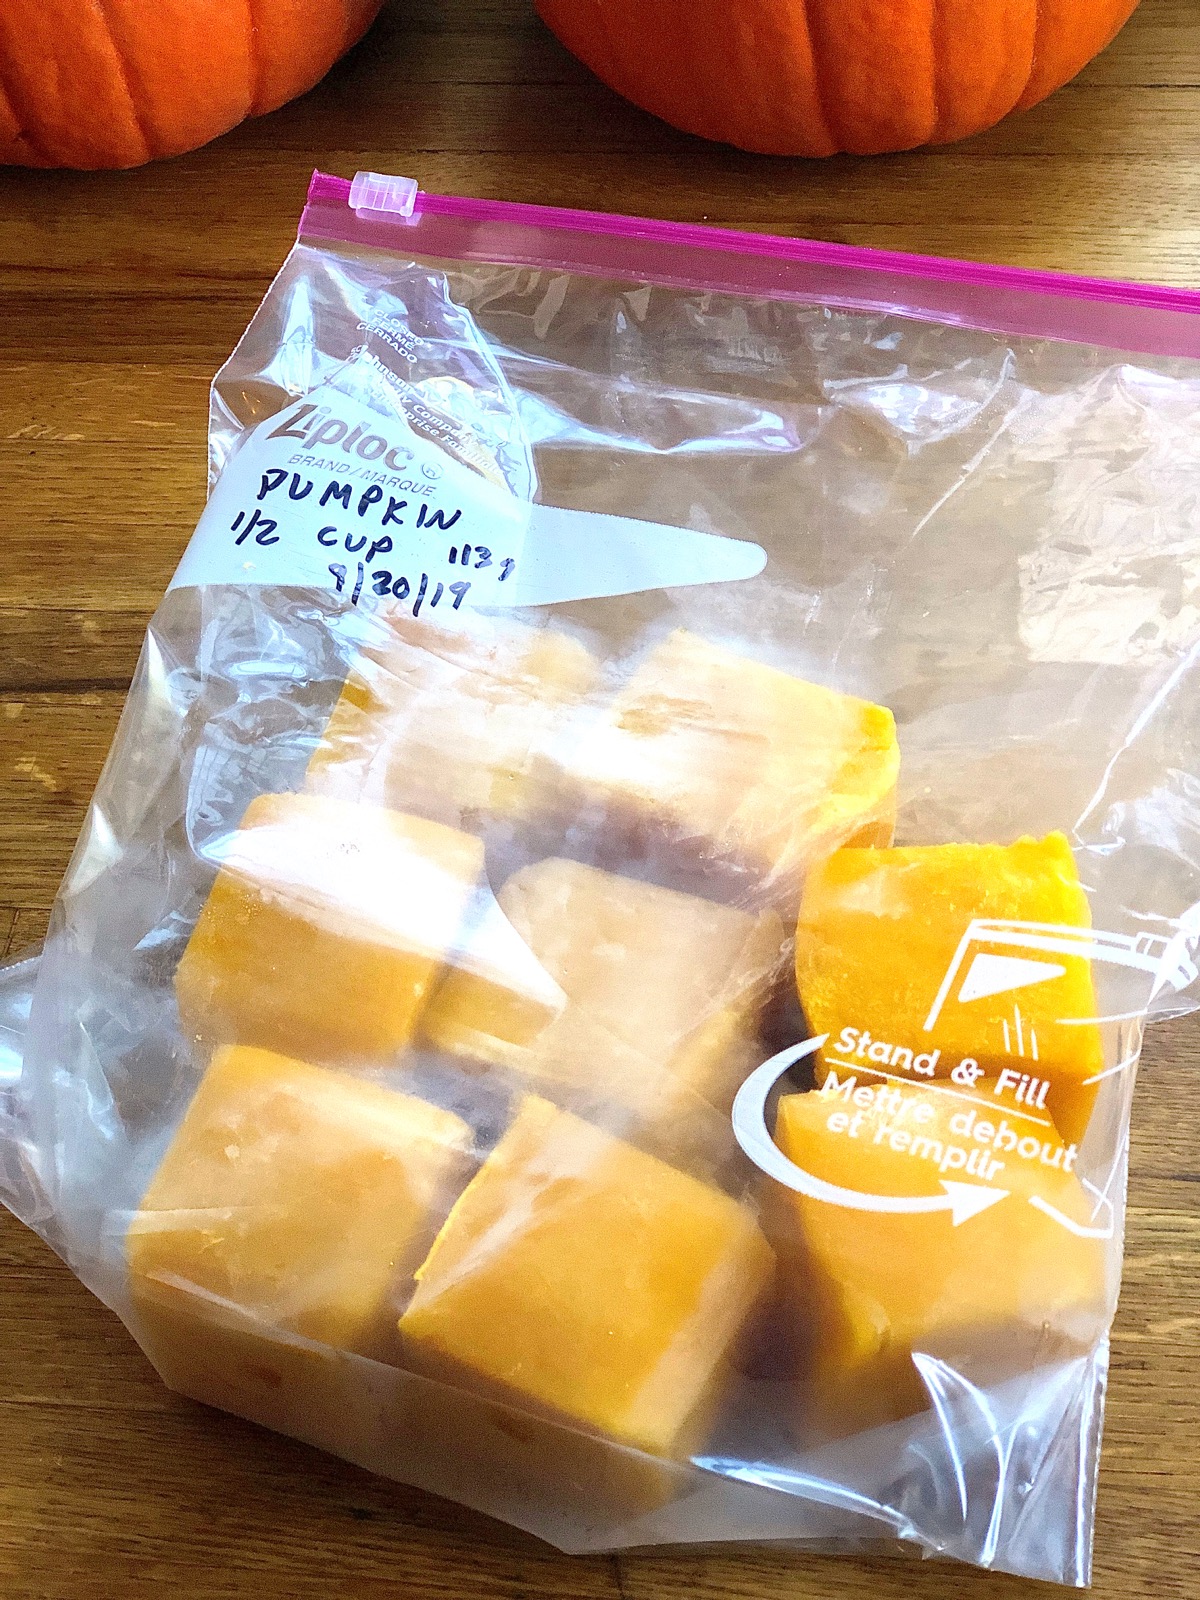 Homemade pumpkin purée frozen in cubes, placed in a labeled freezer bag